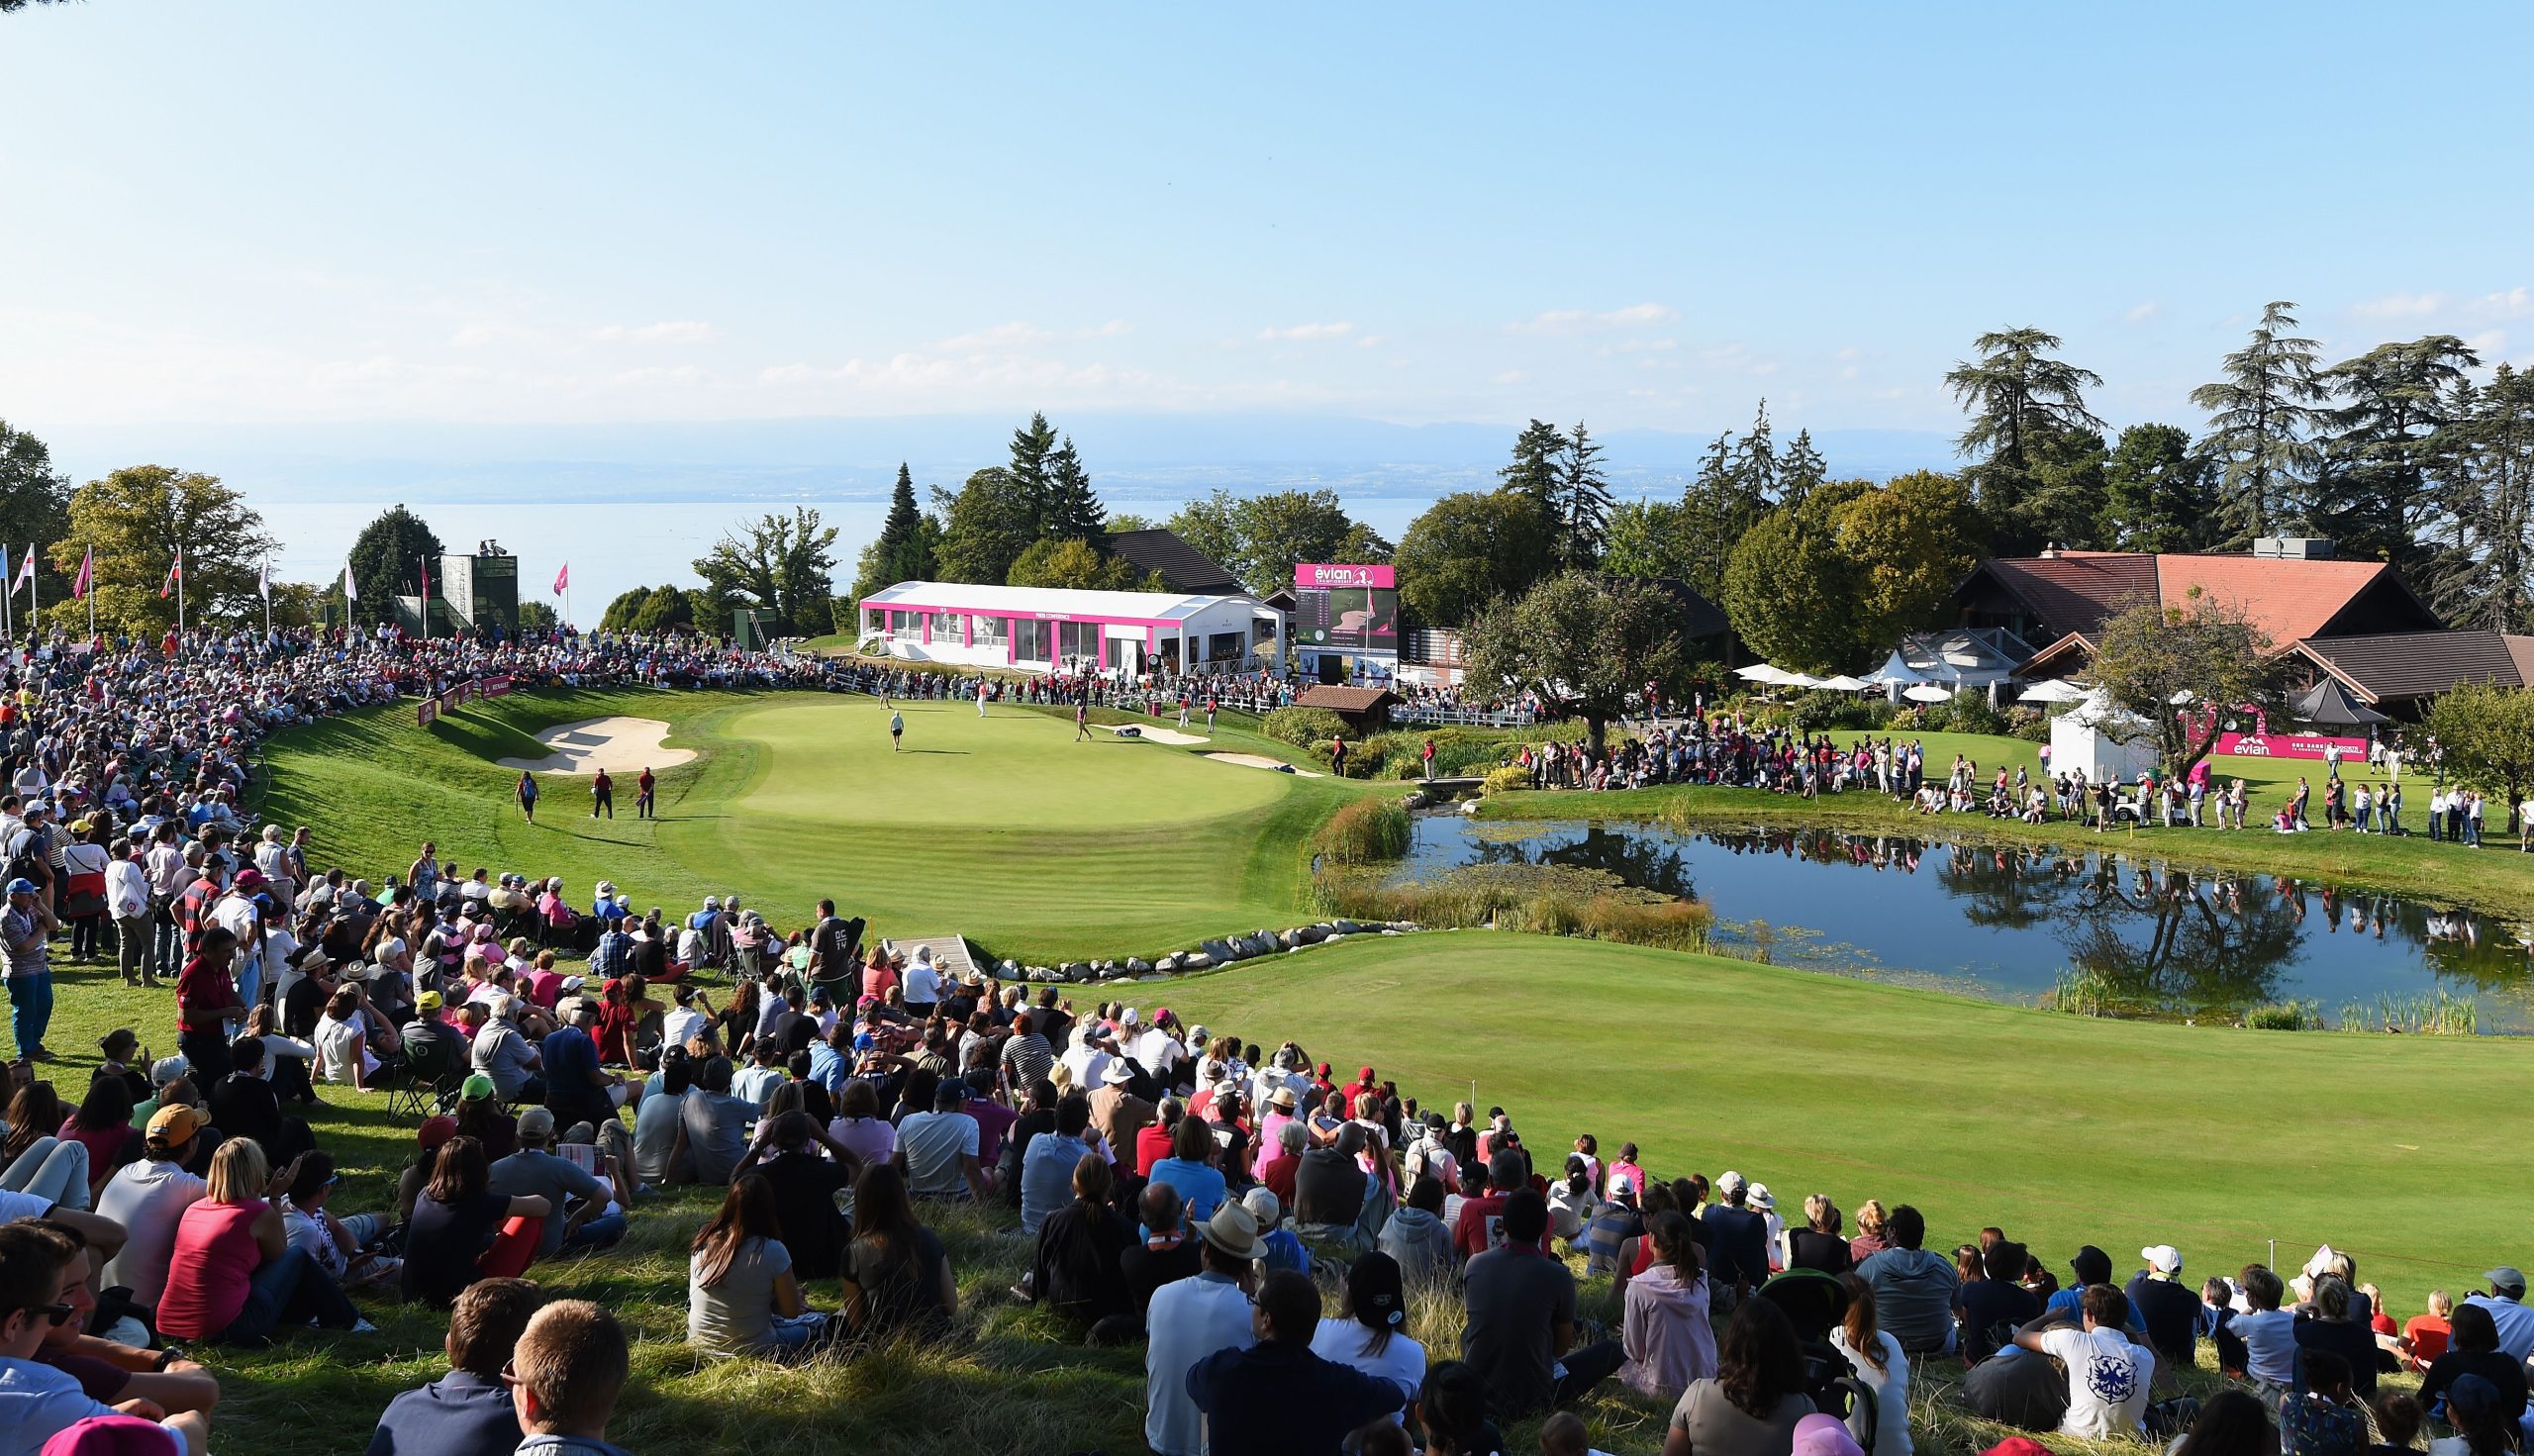 Many spectators surrounding the golf course green and fairway at The Evian Championship.